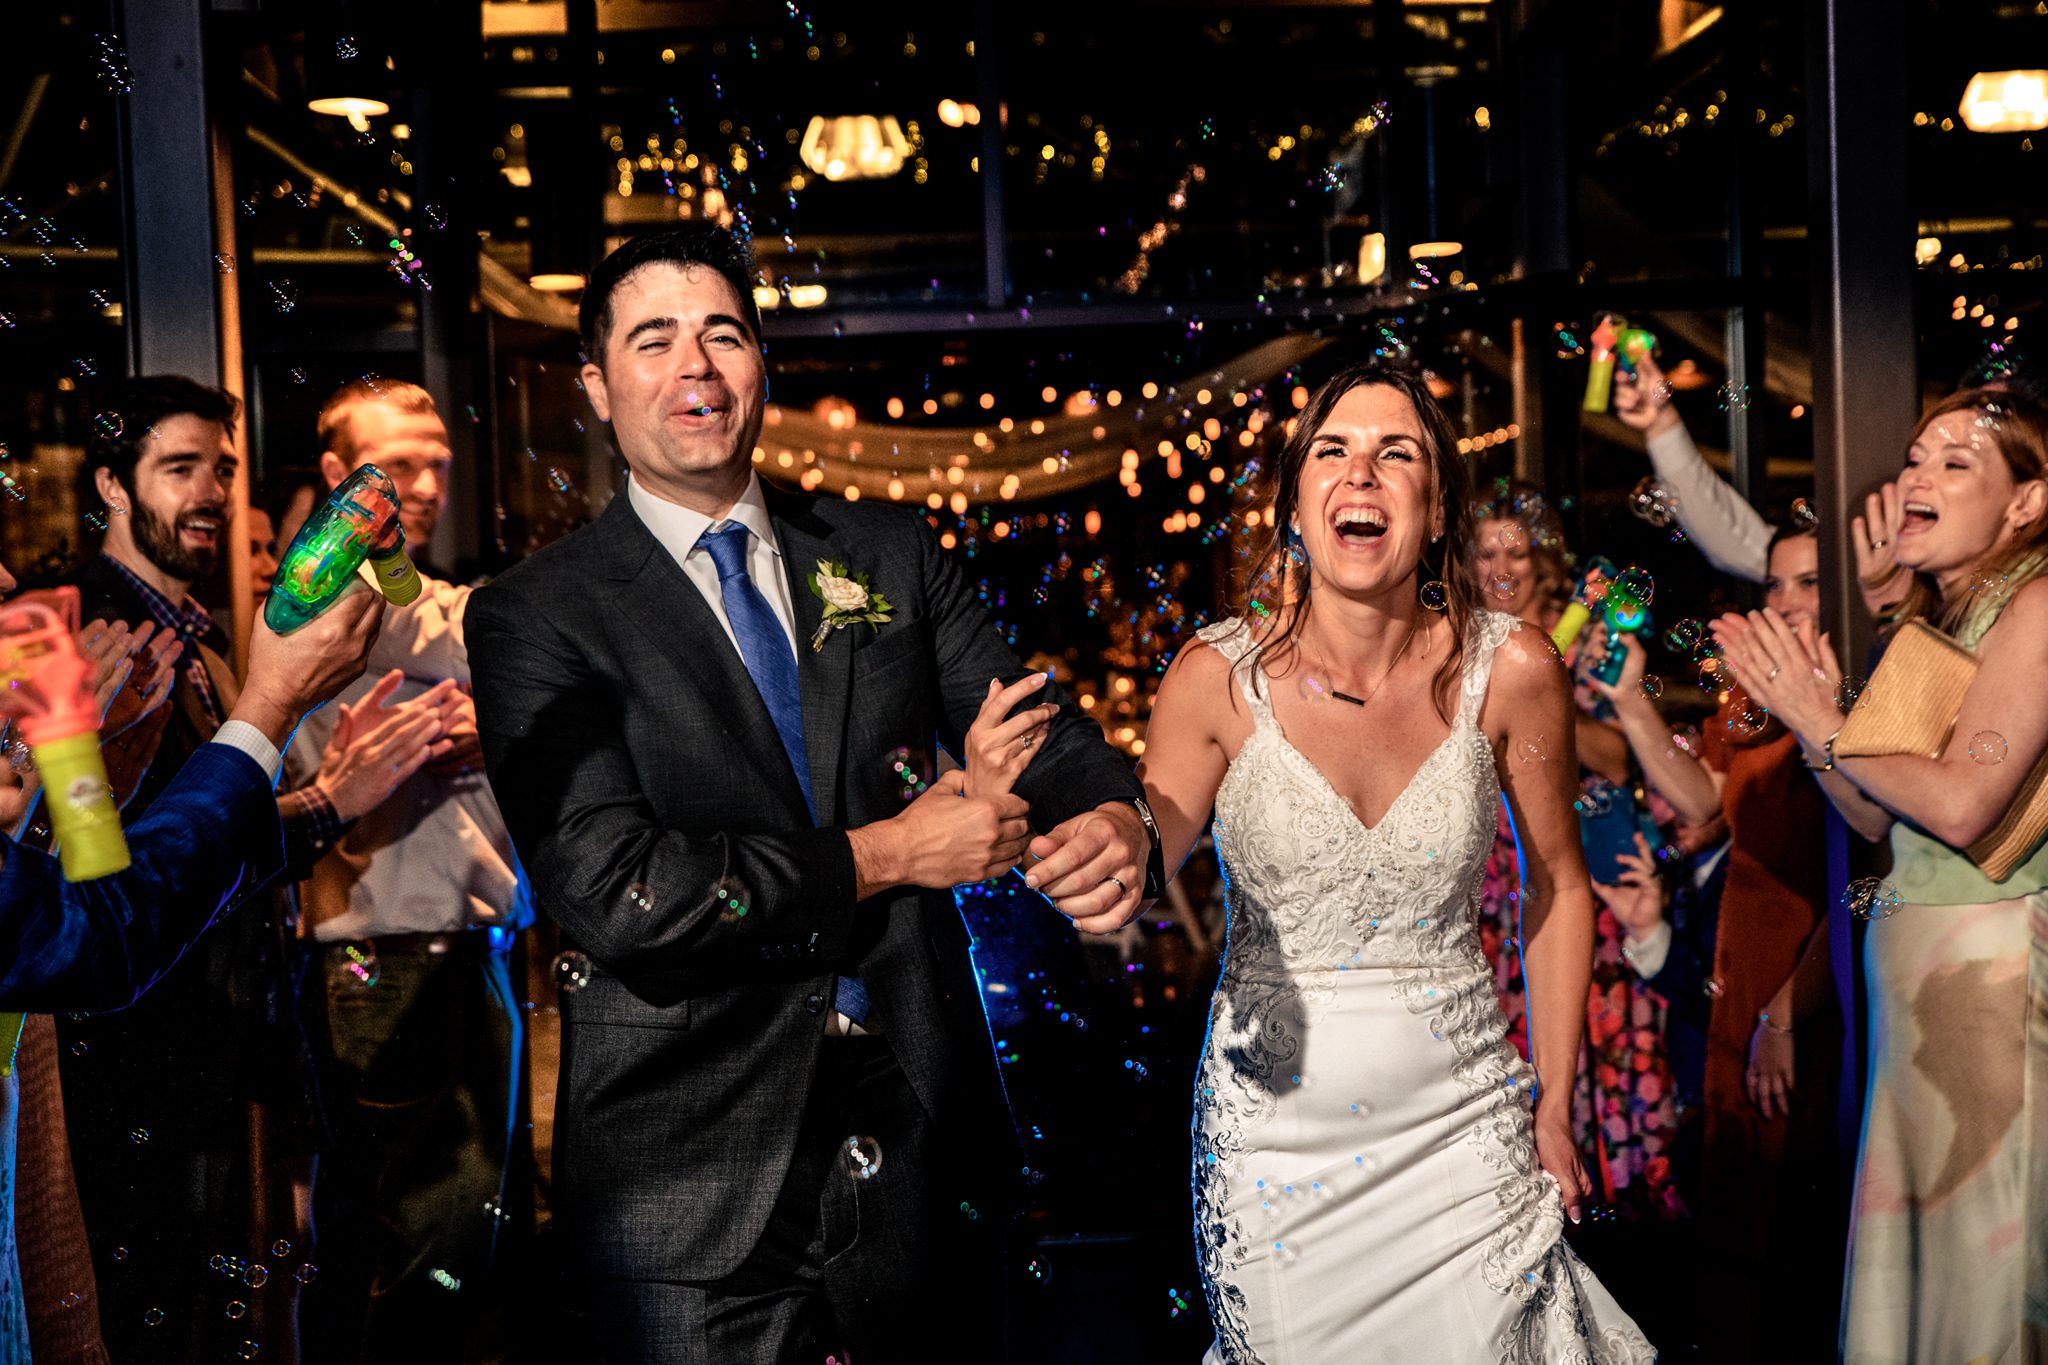 A bride and groom exiting a Crest Pavilion party with confetti thrown at them, captured by a documentary wedding photographer.